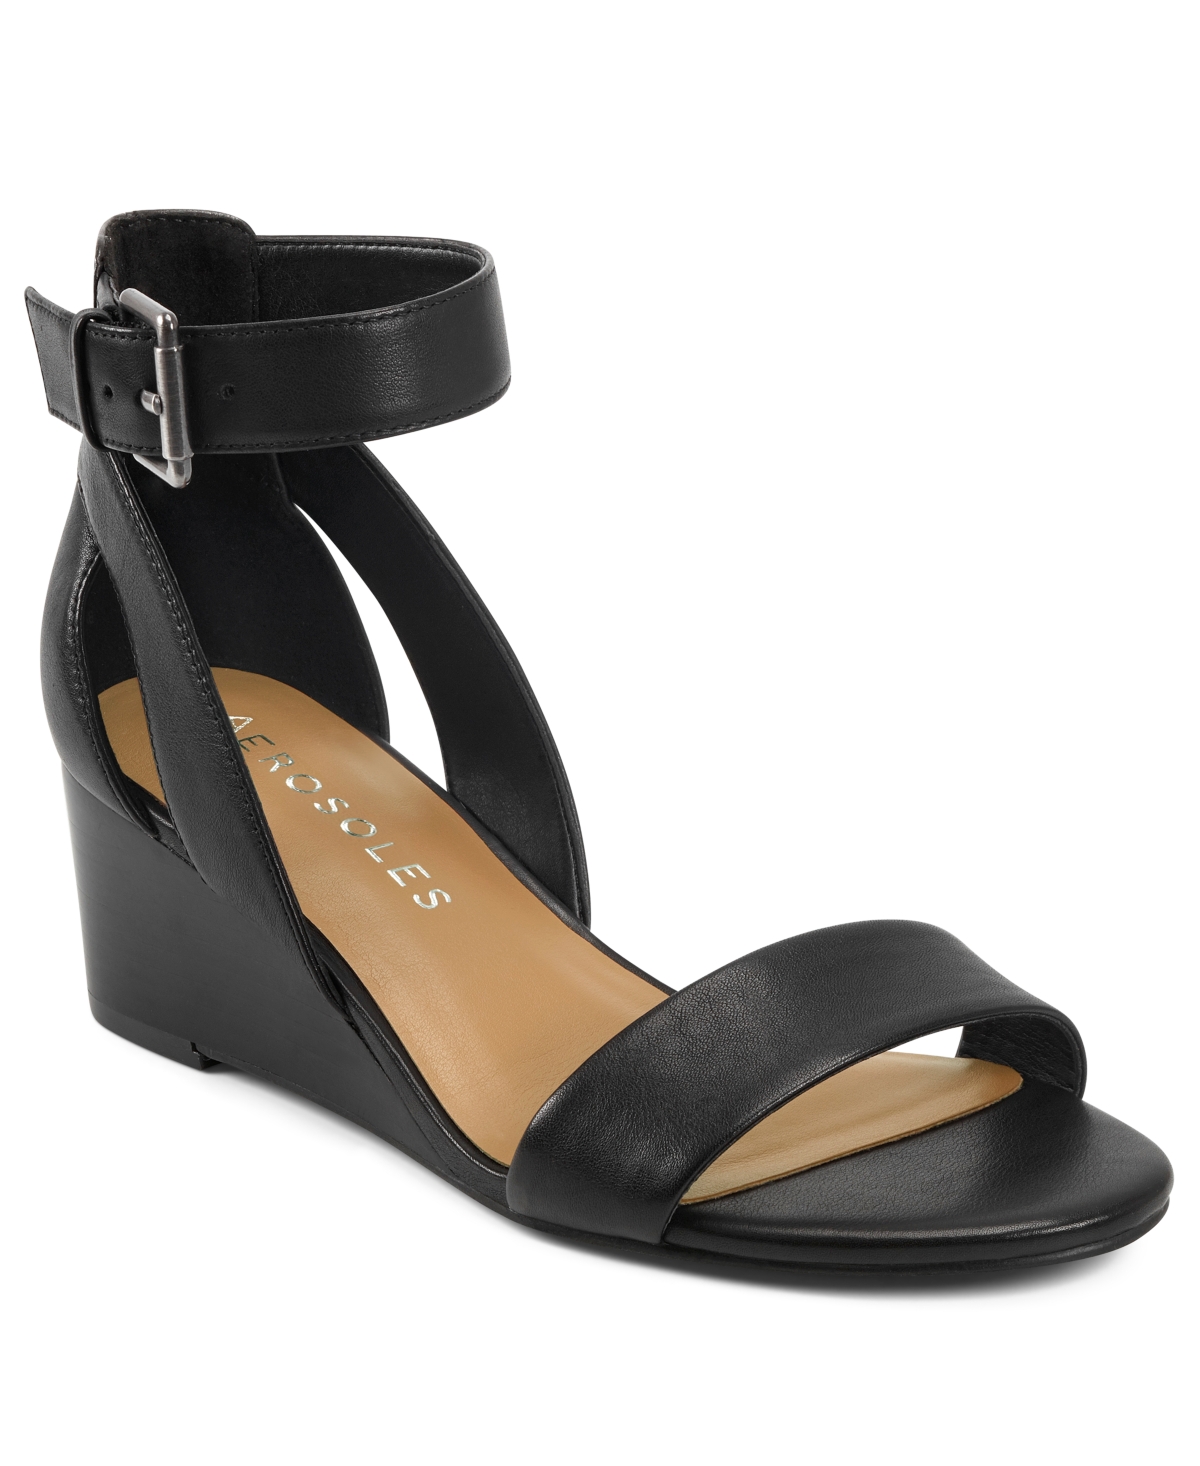 UPC 887039887426 product image for Aerosoles Willowbrook Wedge Sandals Women's Shoes | upcitemdb.com